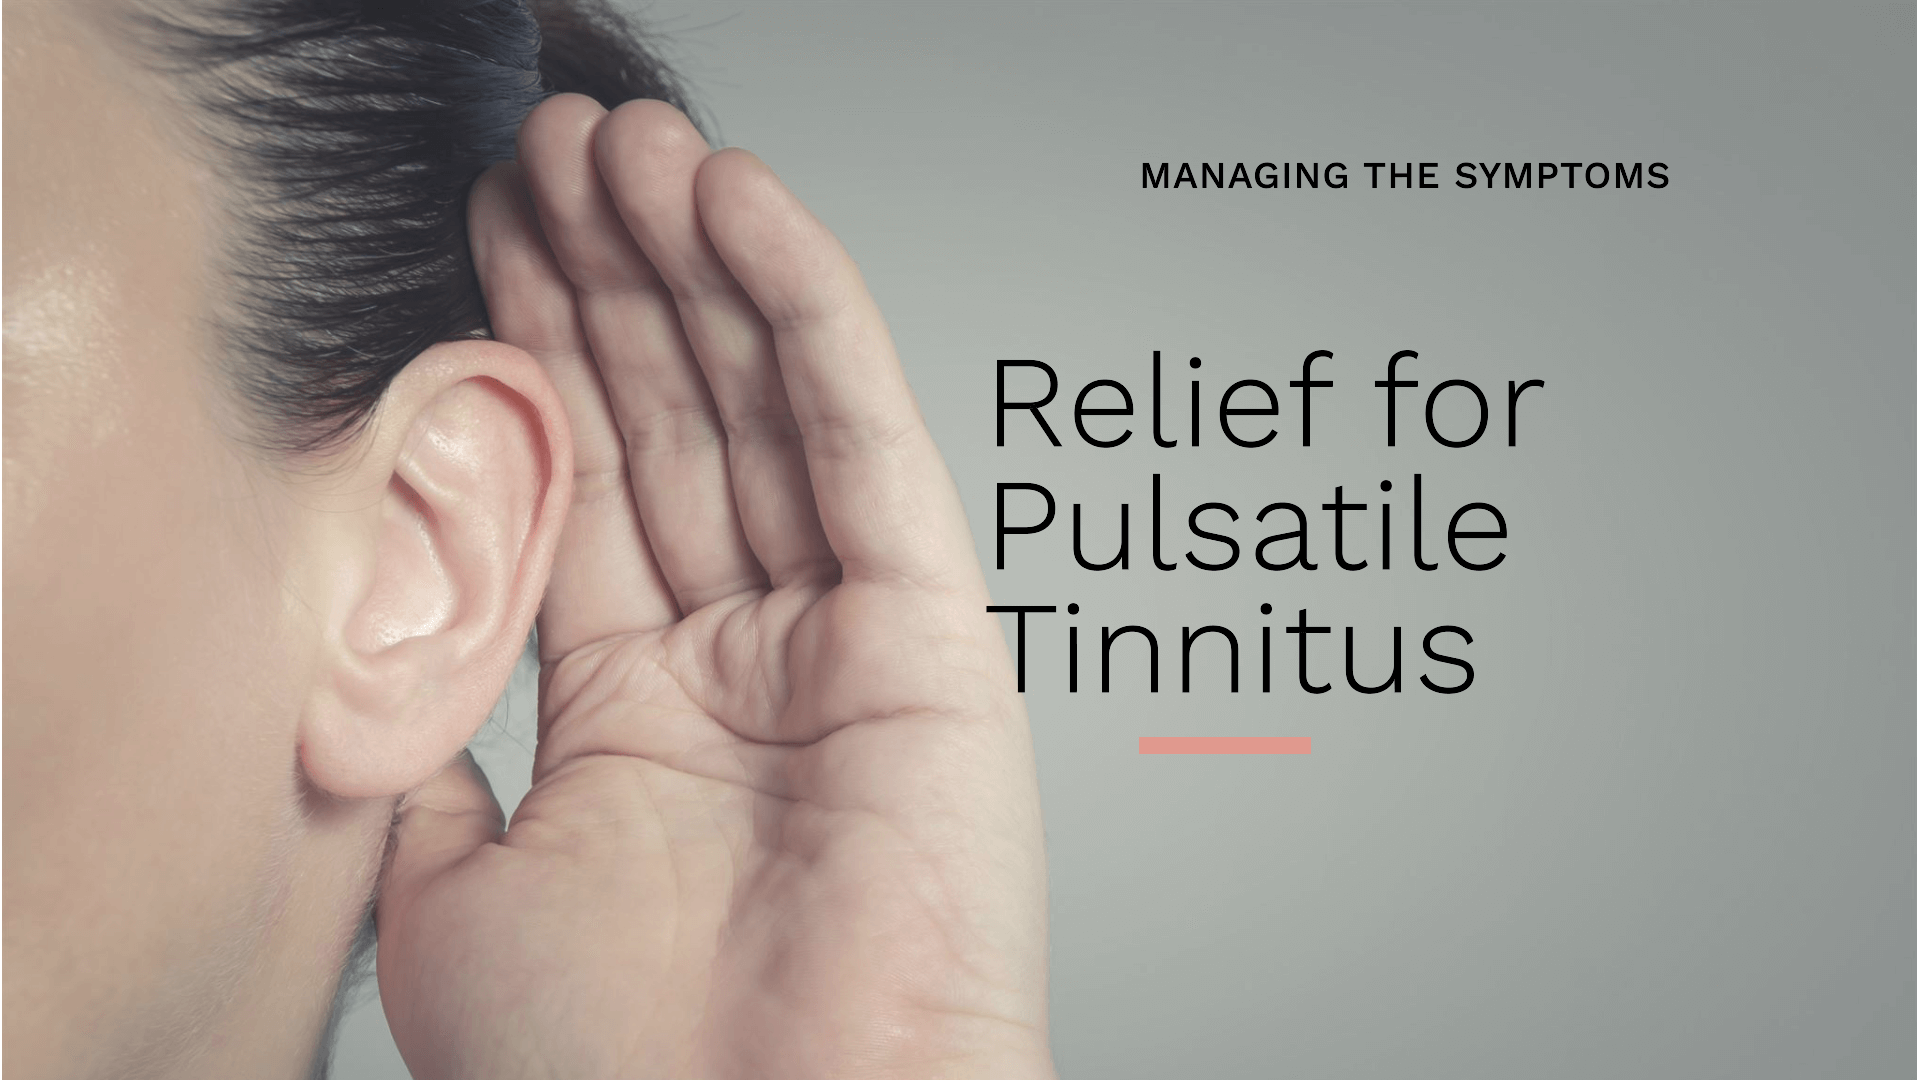 How Can I Manage the Symptoms of Pulsatile Tinnitus?